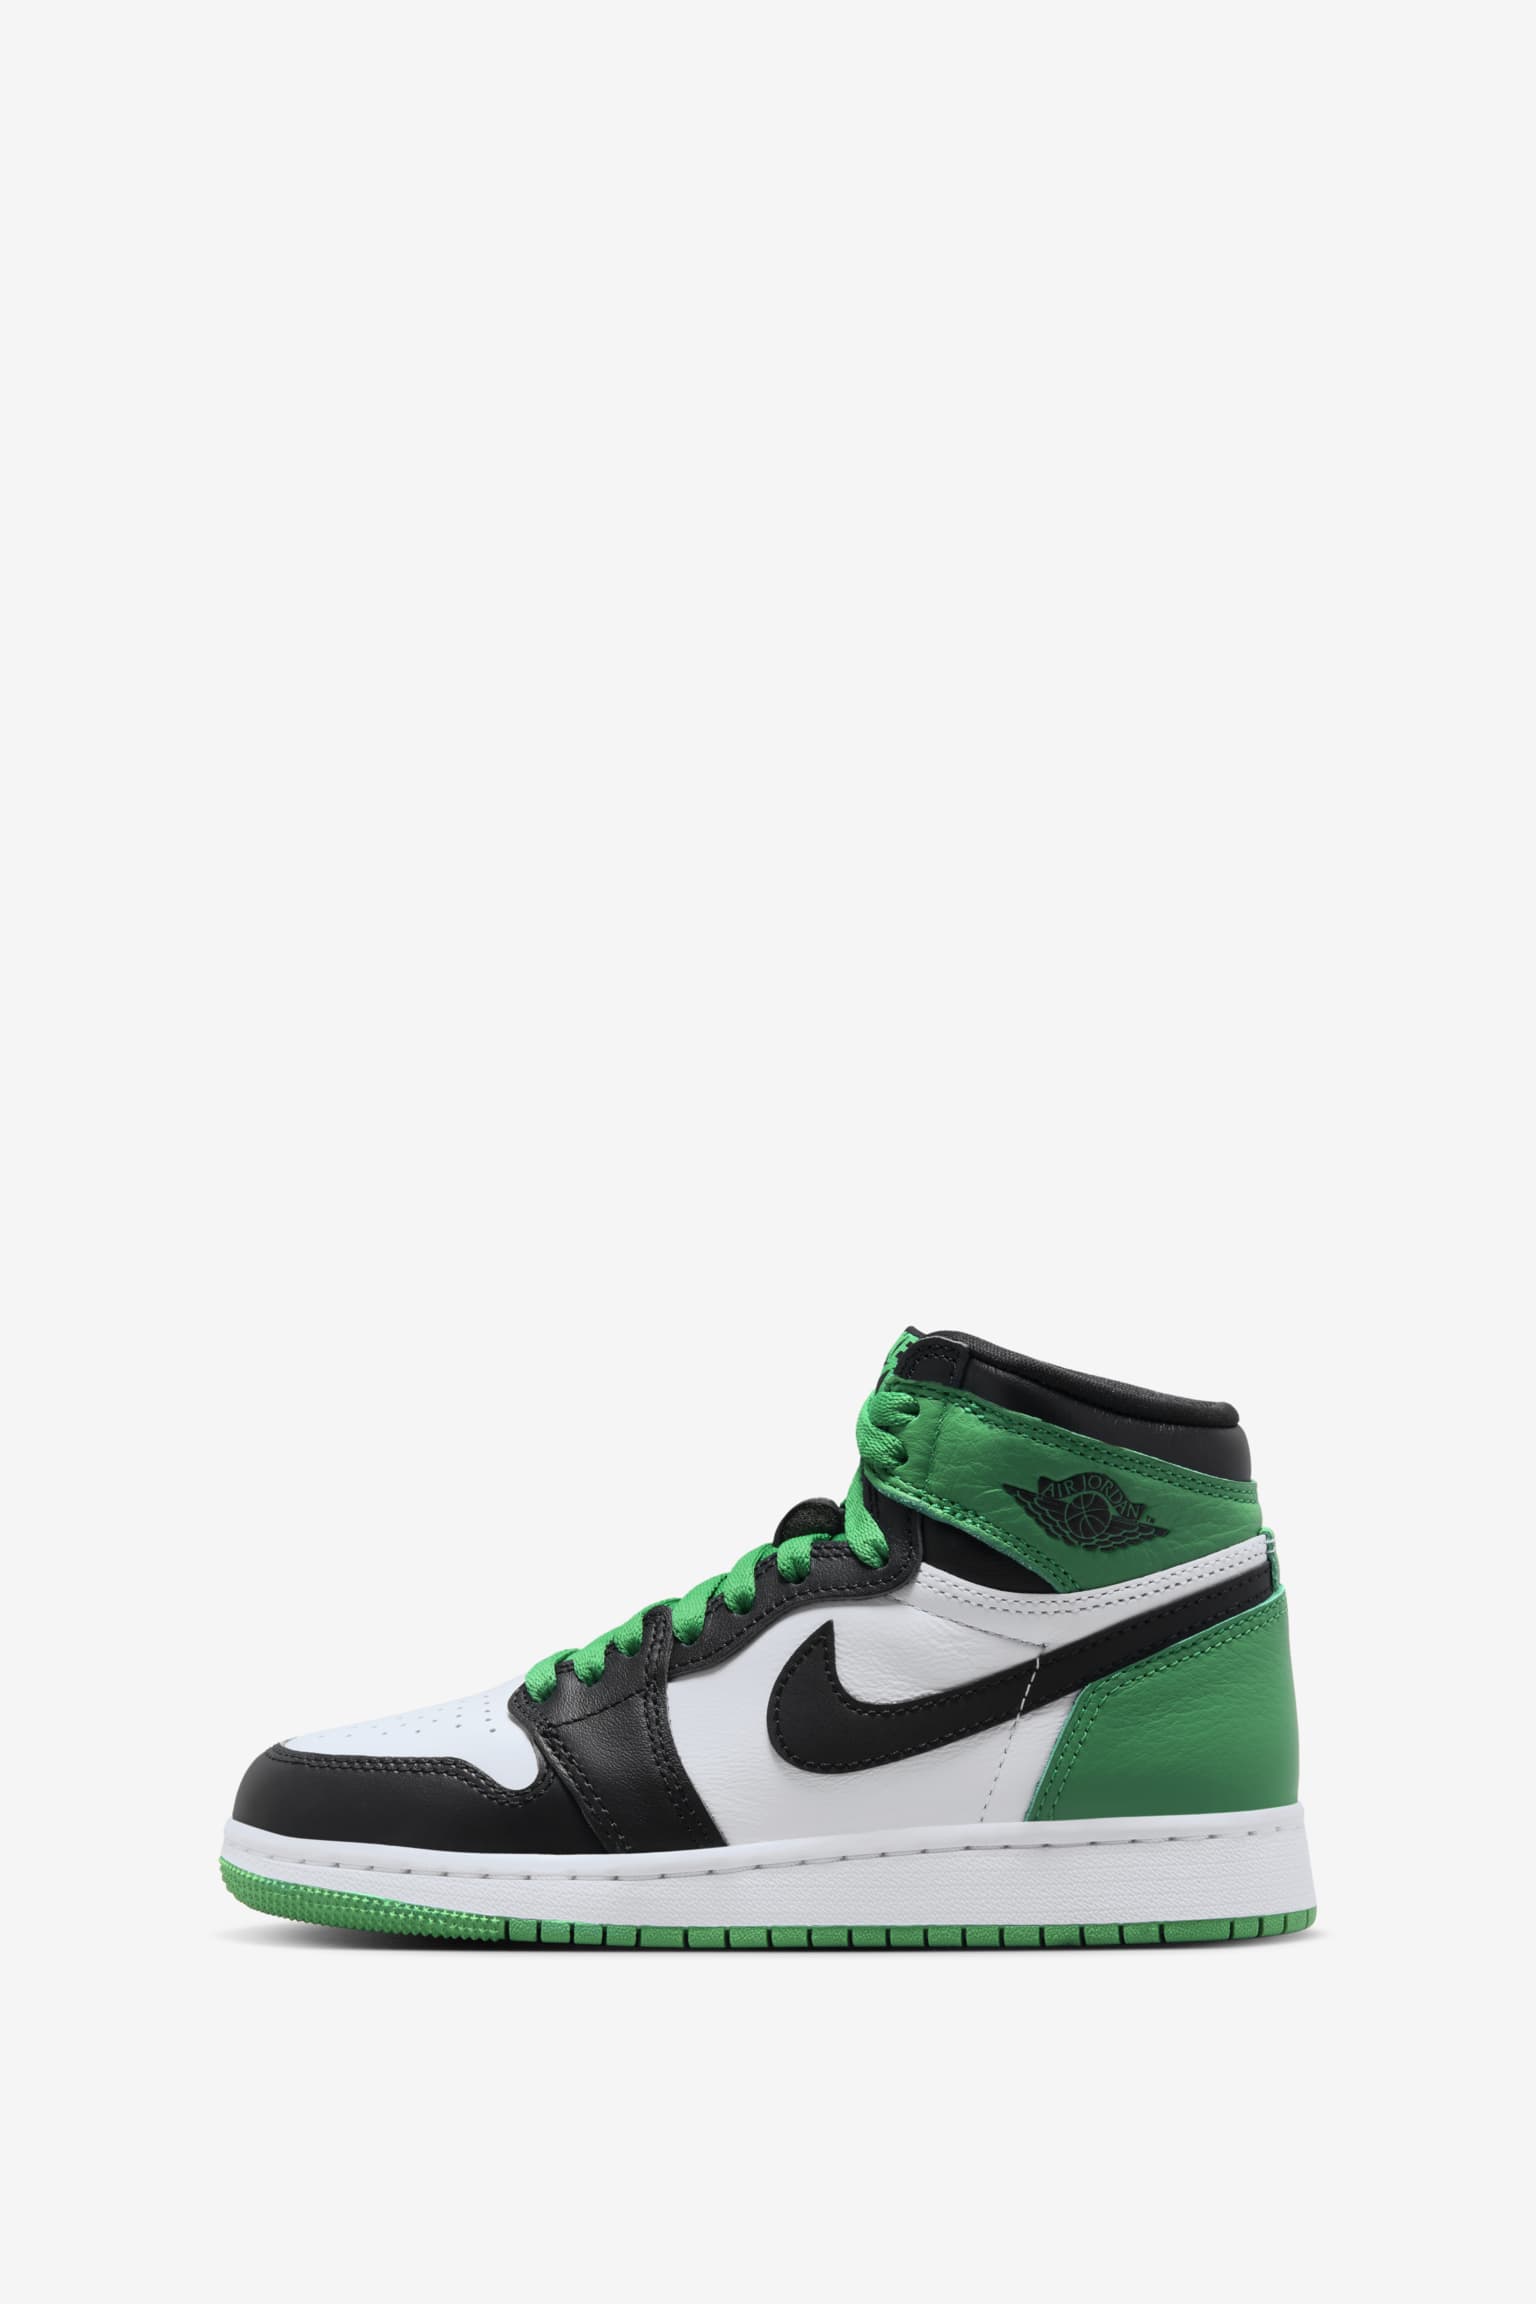 NIKE公式】エア ジョーダン 1 HIGH 'Black and Lucky Green' (DZ5485 